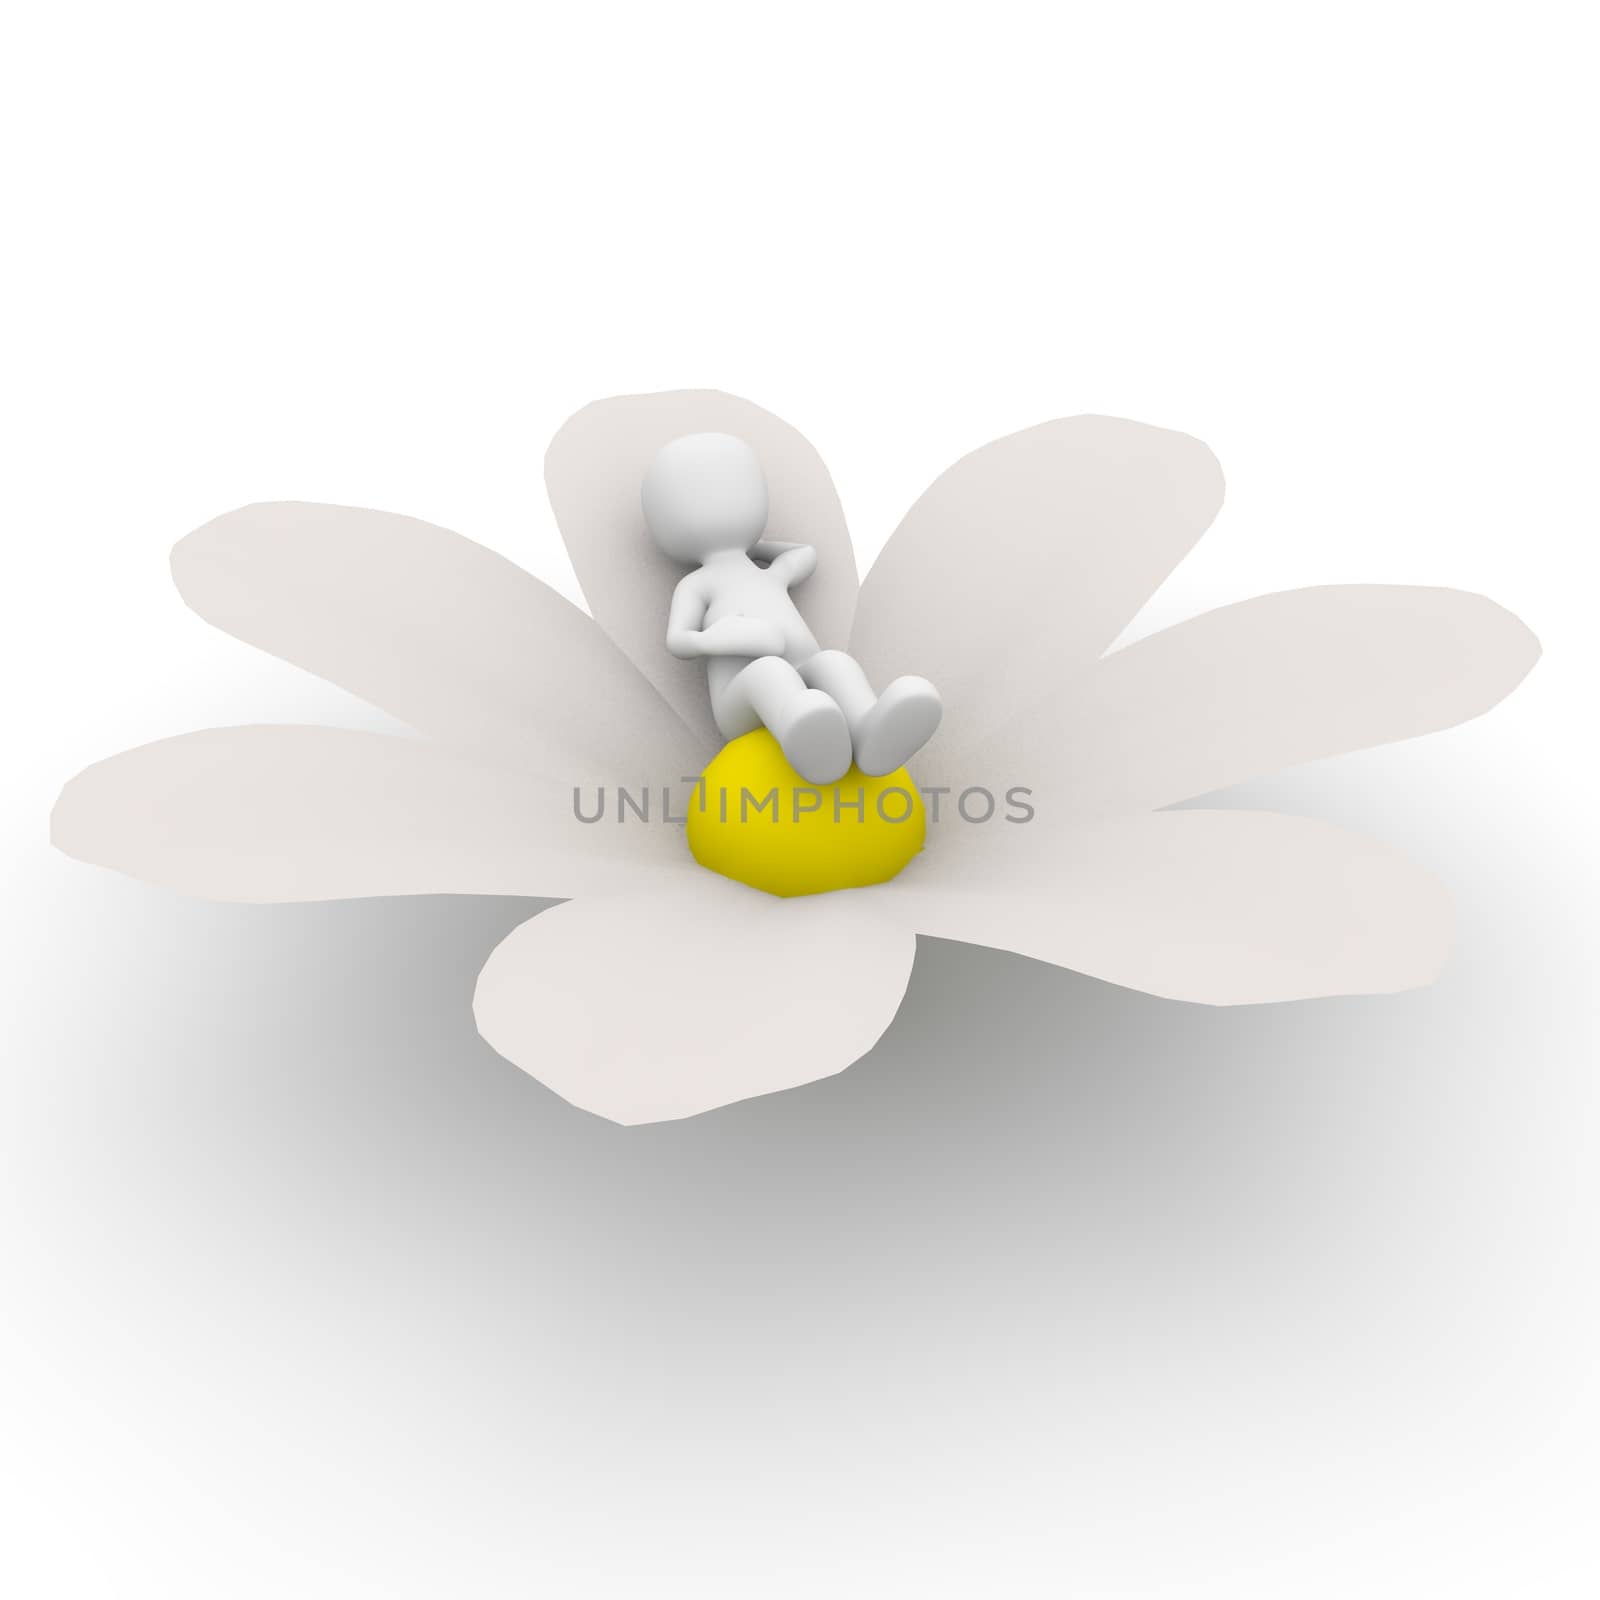 A 3D character relax on a big flower.